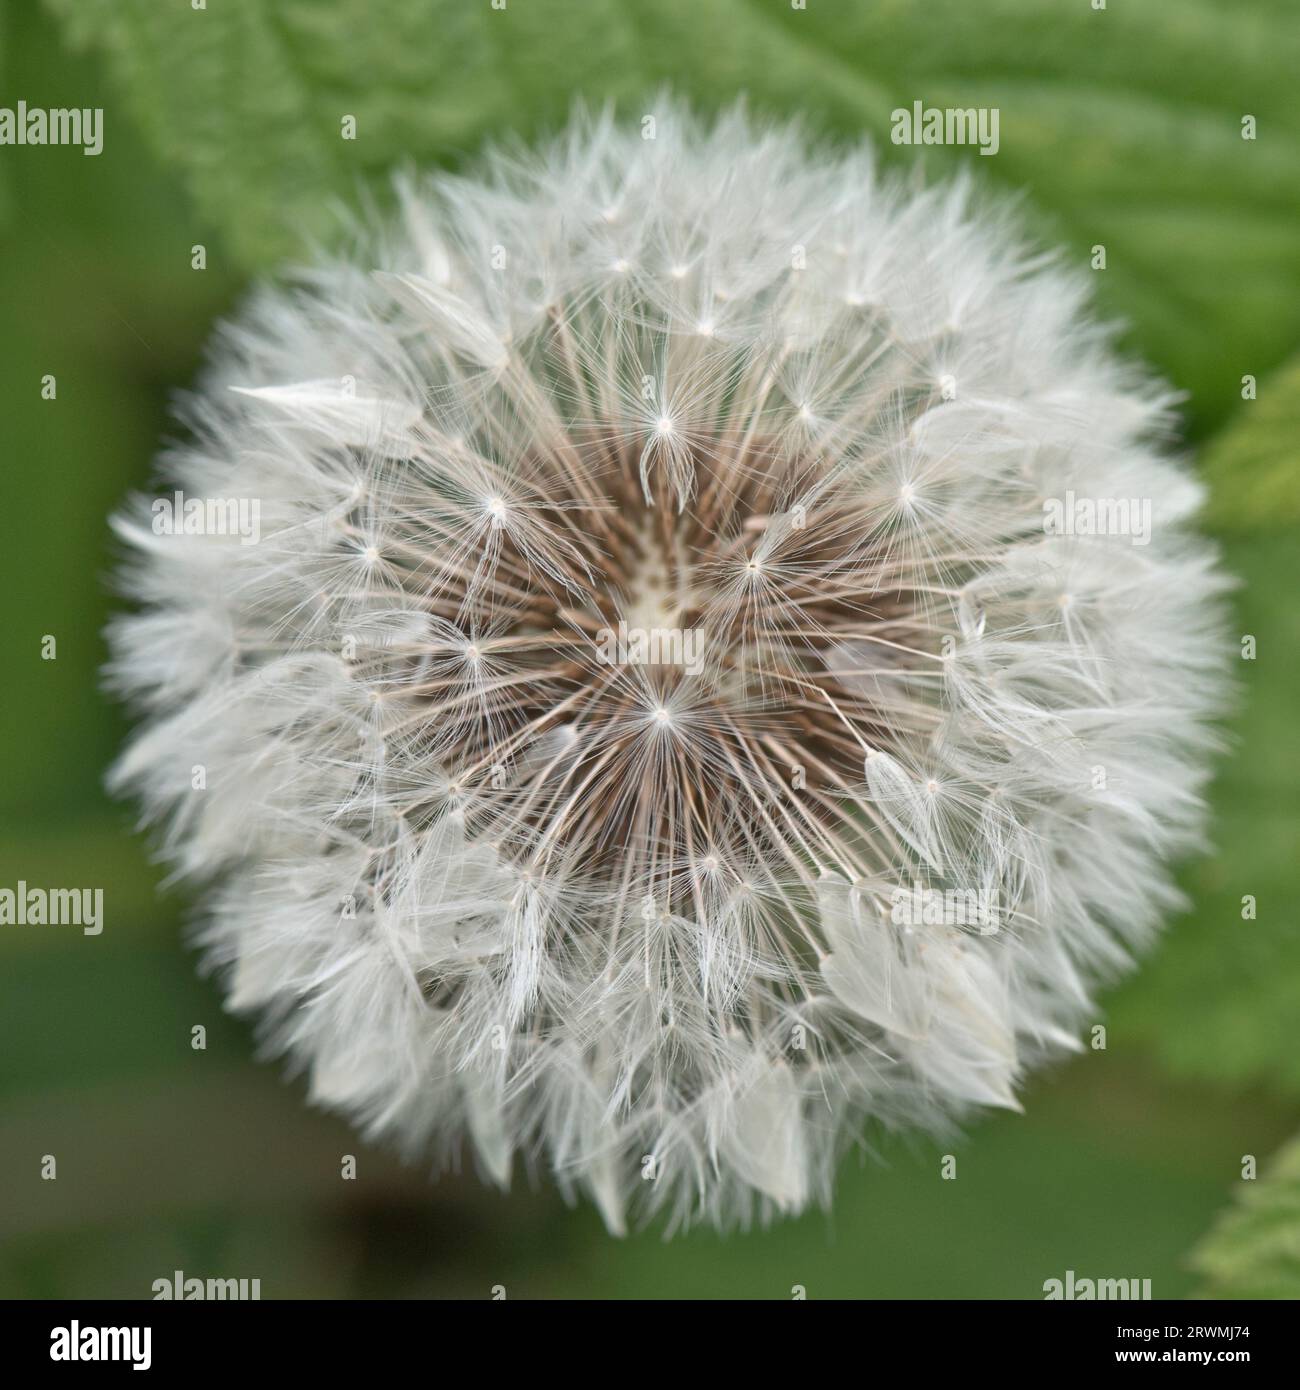 Seed head 'clock' of a dandelion (Taraxacum officinale) white pappi terminating in fruits or capsulae distributed by wind, Berkshire, May Stock Photo